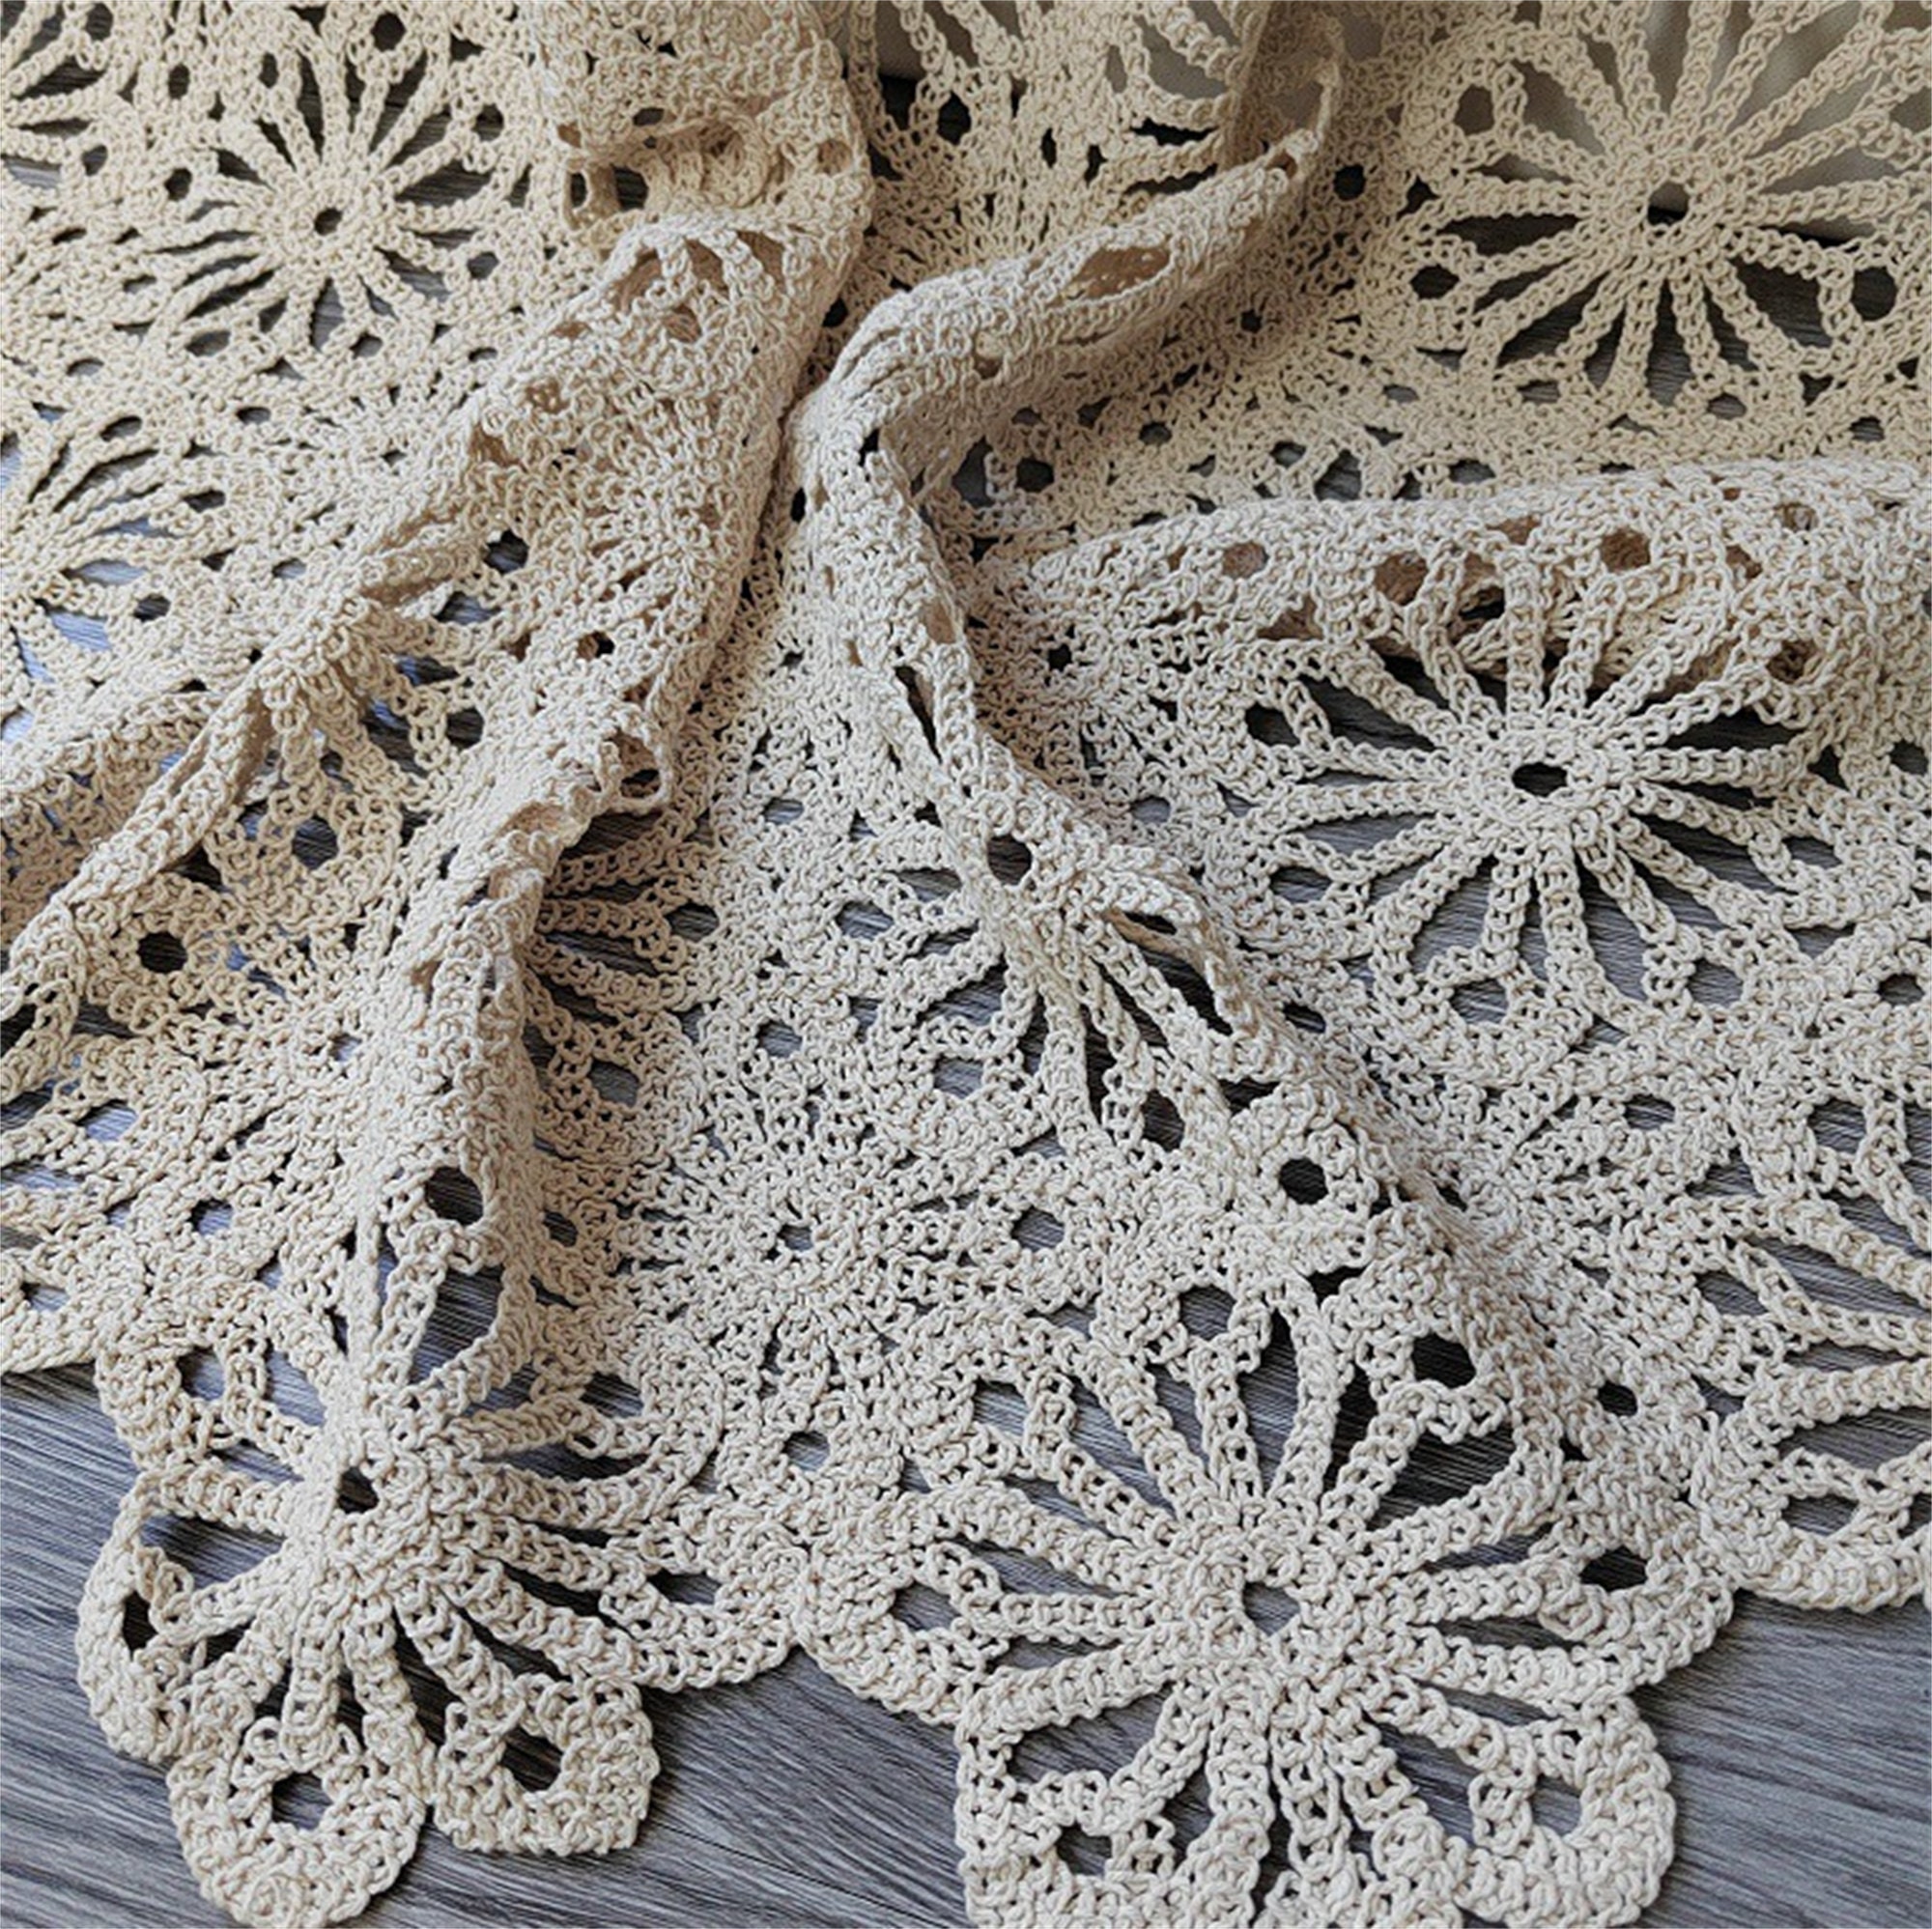 Off White Lace Fabric With Retro Floral Pattern, Bridal Lace